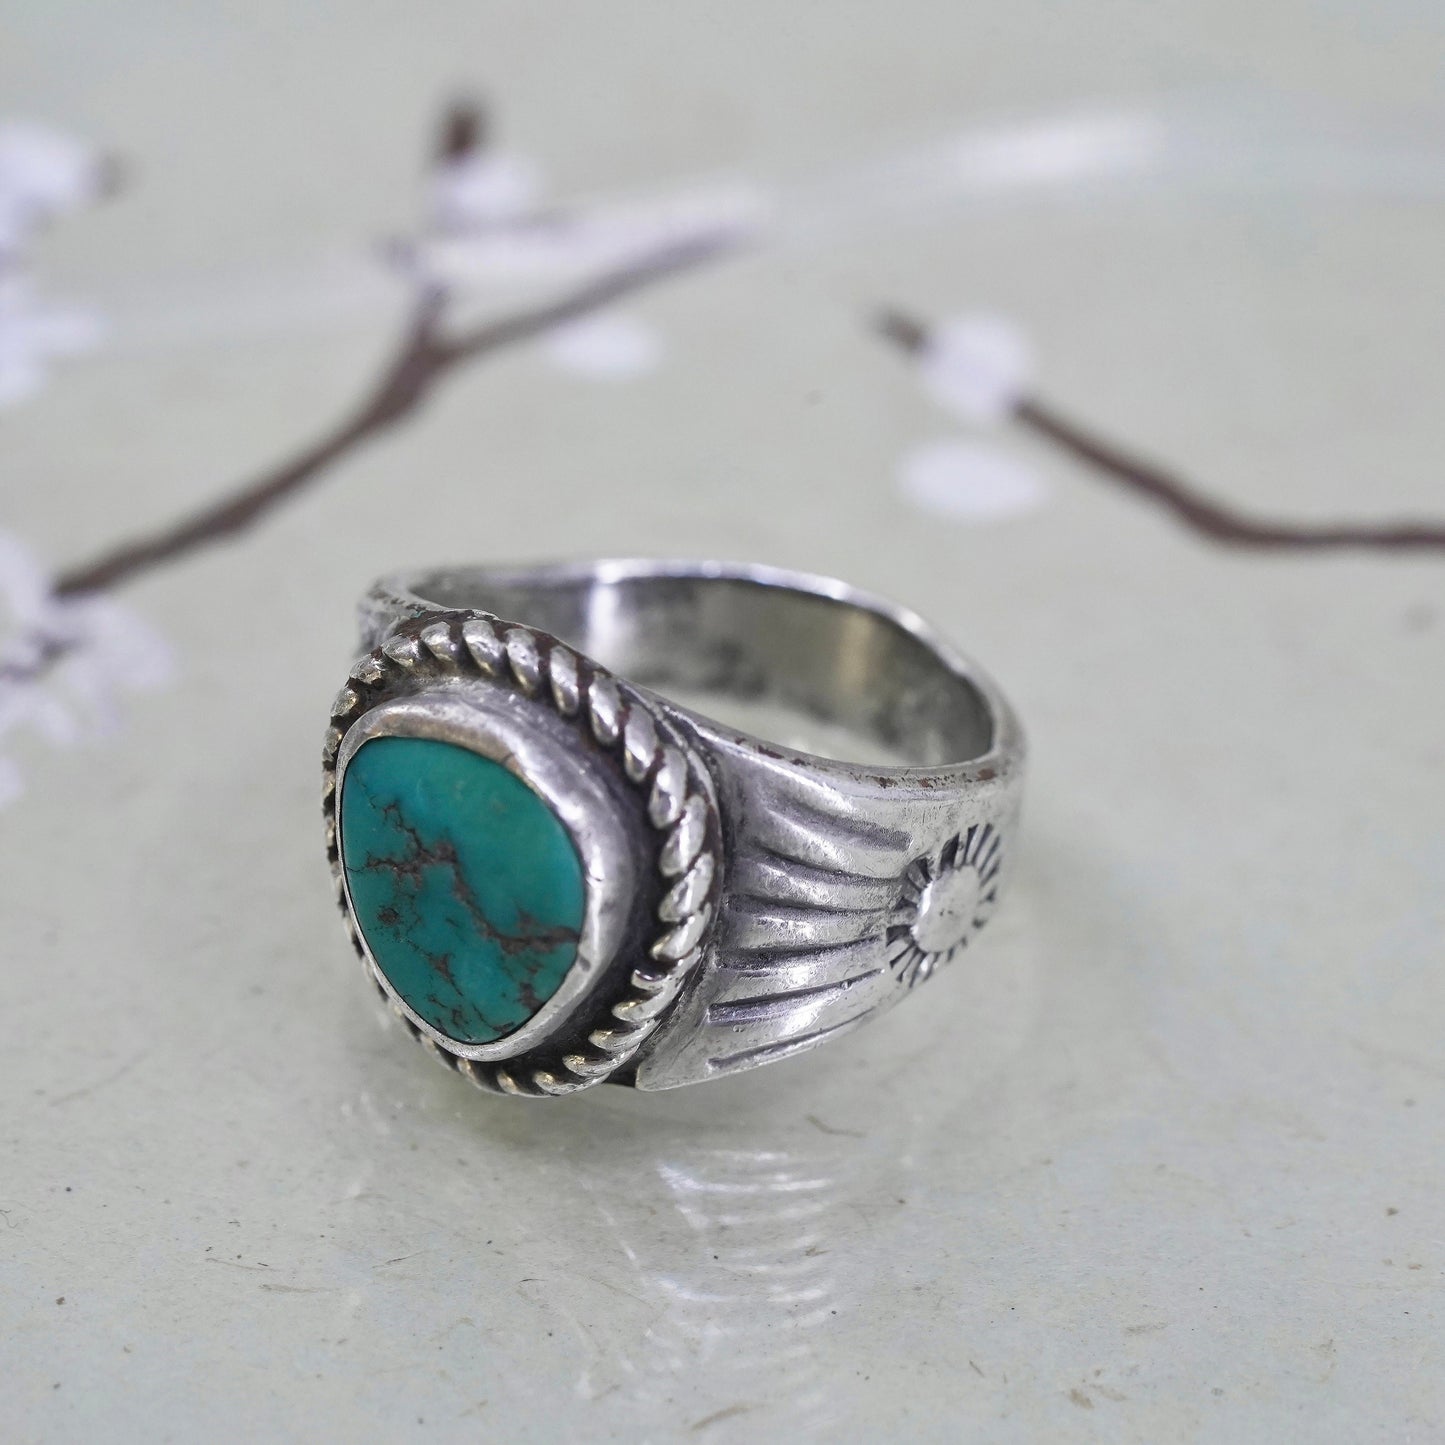 Size 8, Native American sterling 925 silver ring with turquoise, southwestern